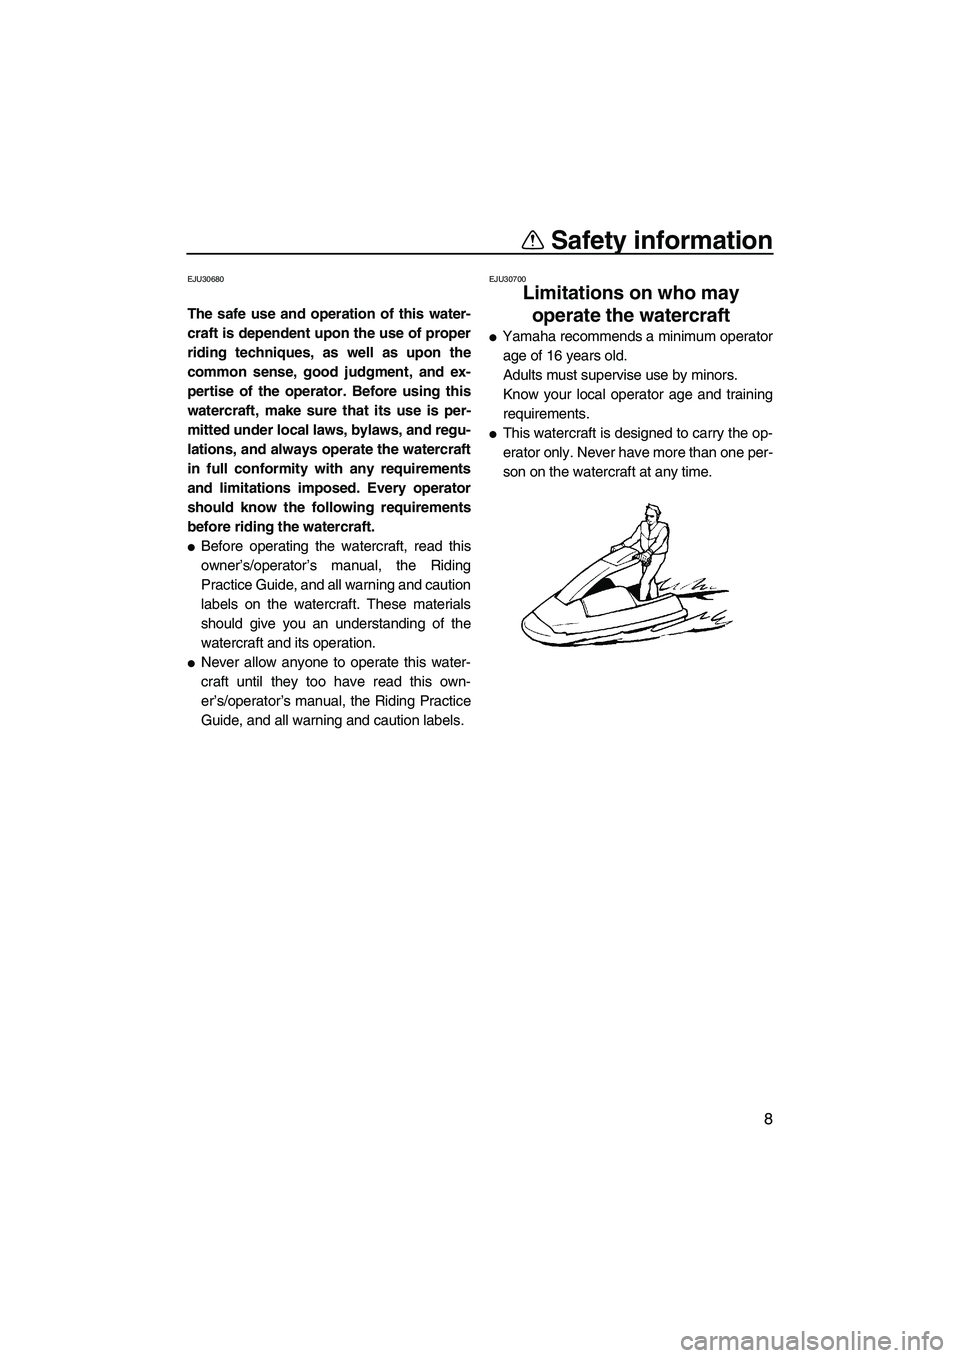 YAMAHA SUPERJET 2007  Owners Manual Safety information
8
EJU30680
The safe use and operation of this water-
craft is dependent upon the use of proper
riding techniques, as well as upon the
common sense, good judgment, and ex-
pertise of